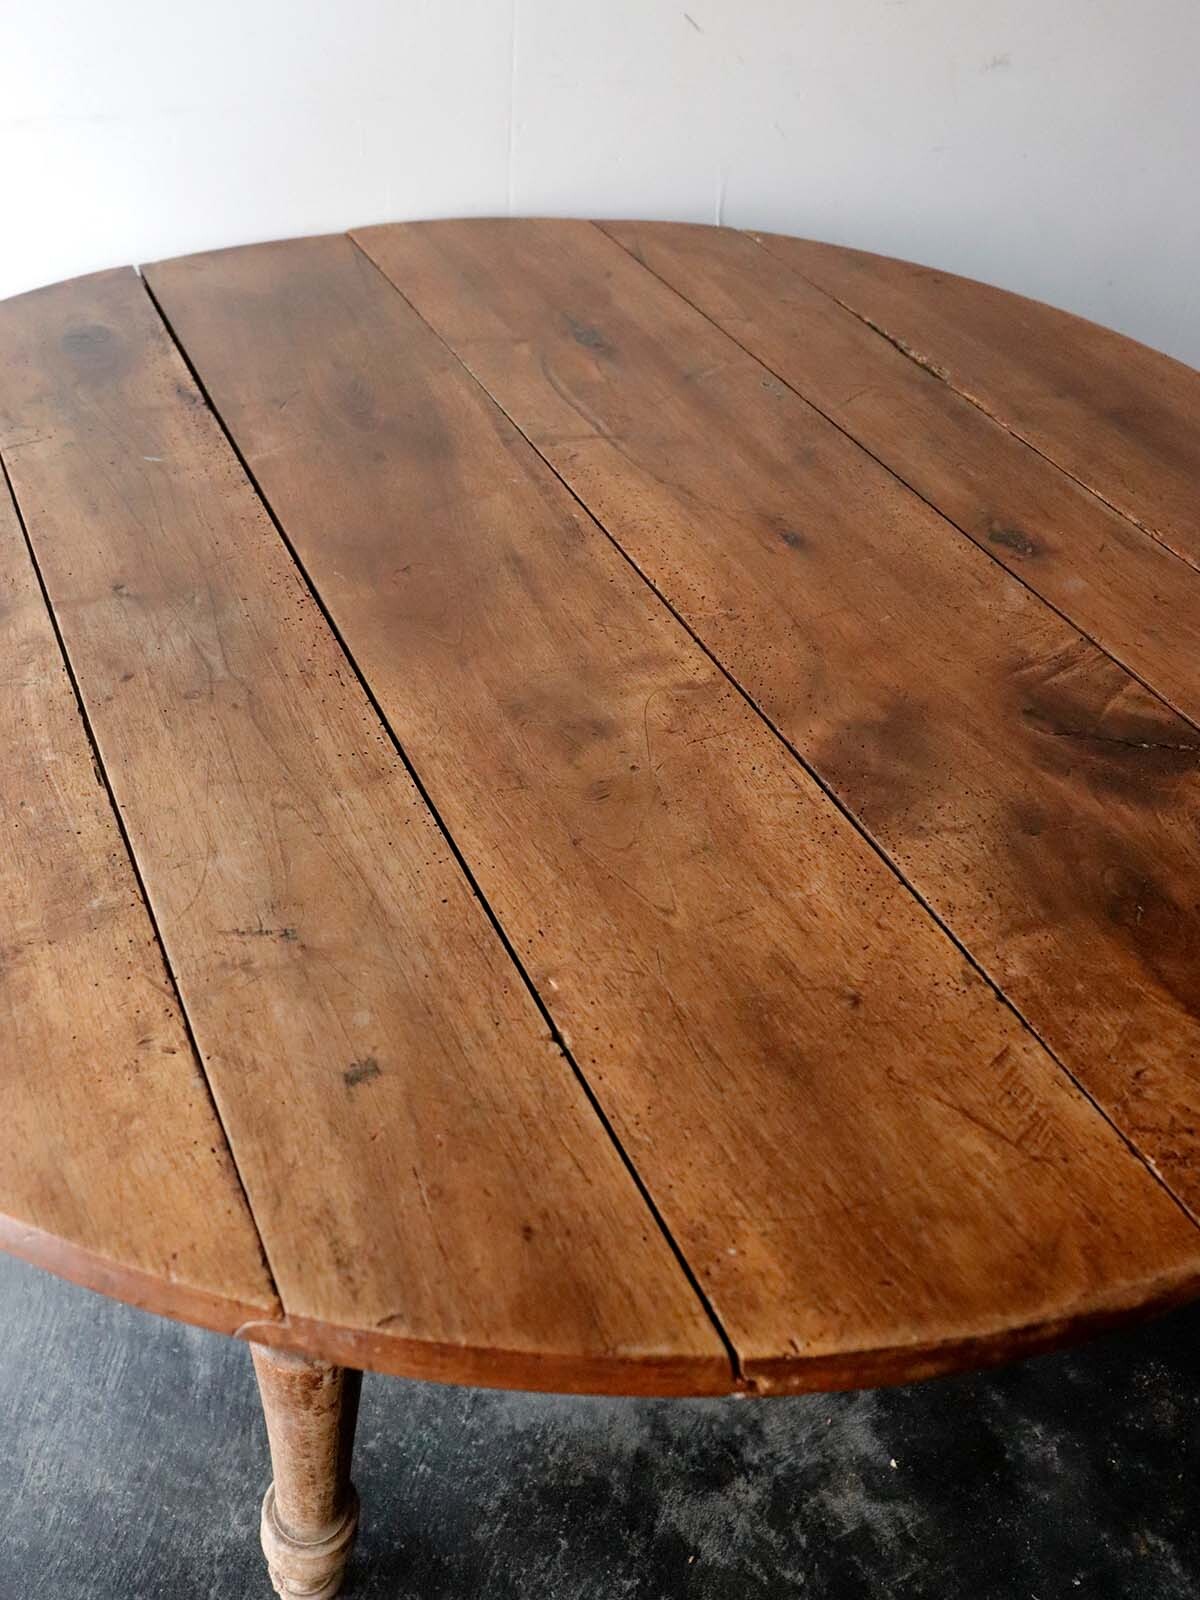 19c,folding wood table,round table,France,antique